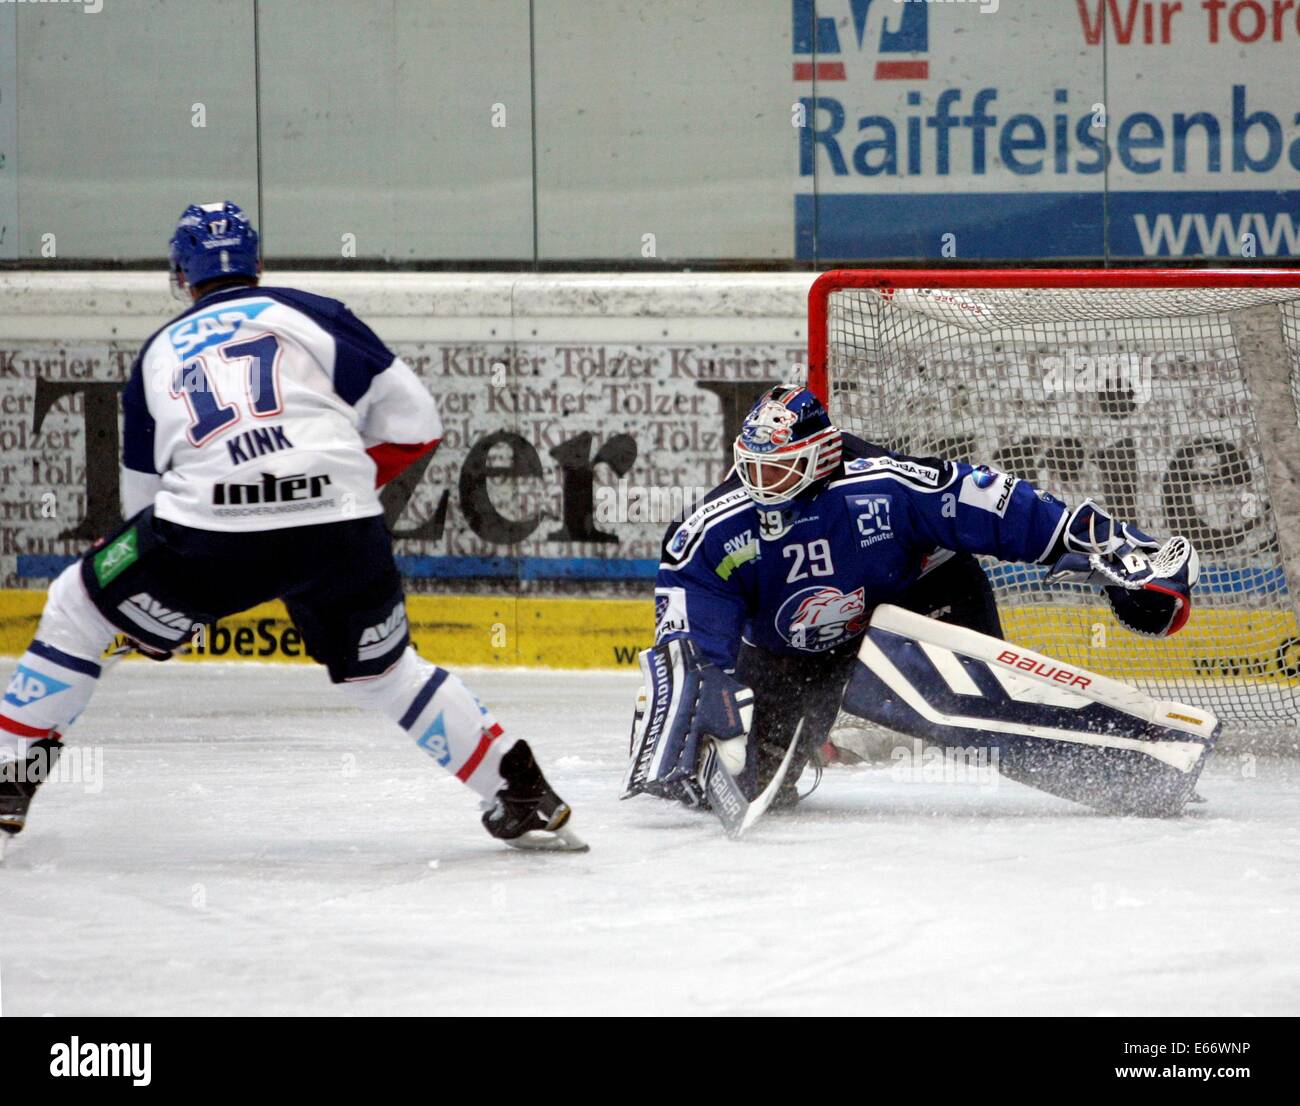 Bad Toelz, Bavaria, Germany. 15th Aug, 2014. from left Marcus KNINK /Mannheim, goalkeeper Luca BOLTSHAUSER/Zuerich.two top teams from Germany and Switzerland meet for a ice hockey friendly as preparation for the season, ZSC Lions Zuerich vs Adler Mannheim, August 15, 2014, Bad Toelz, Germany, Credit:  Wolfgang Fehrmann/Wolfgang Fehrmann/ZUMA Wire/Alamy Live News Stock Photo